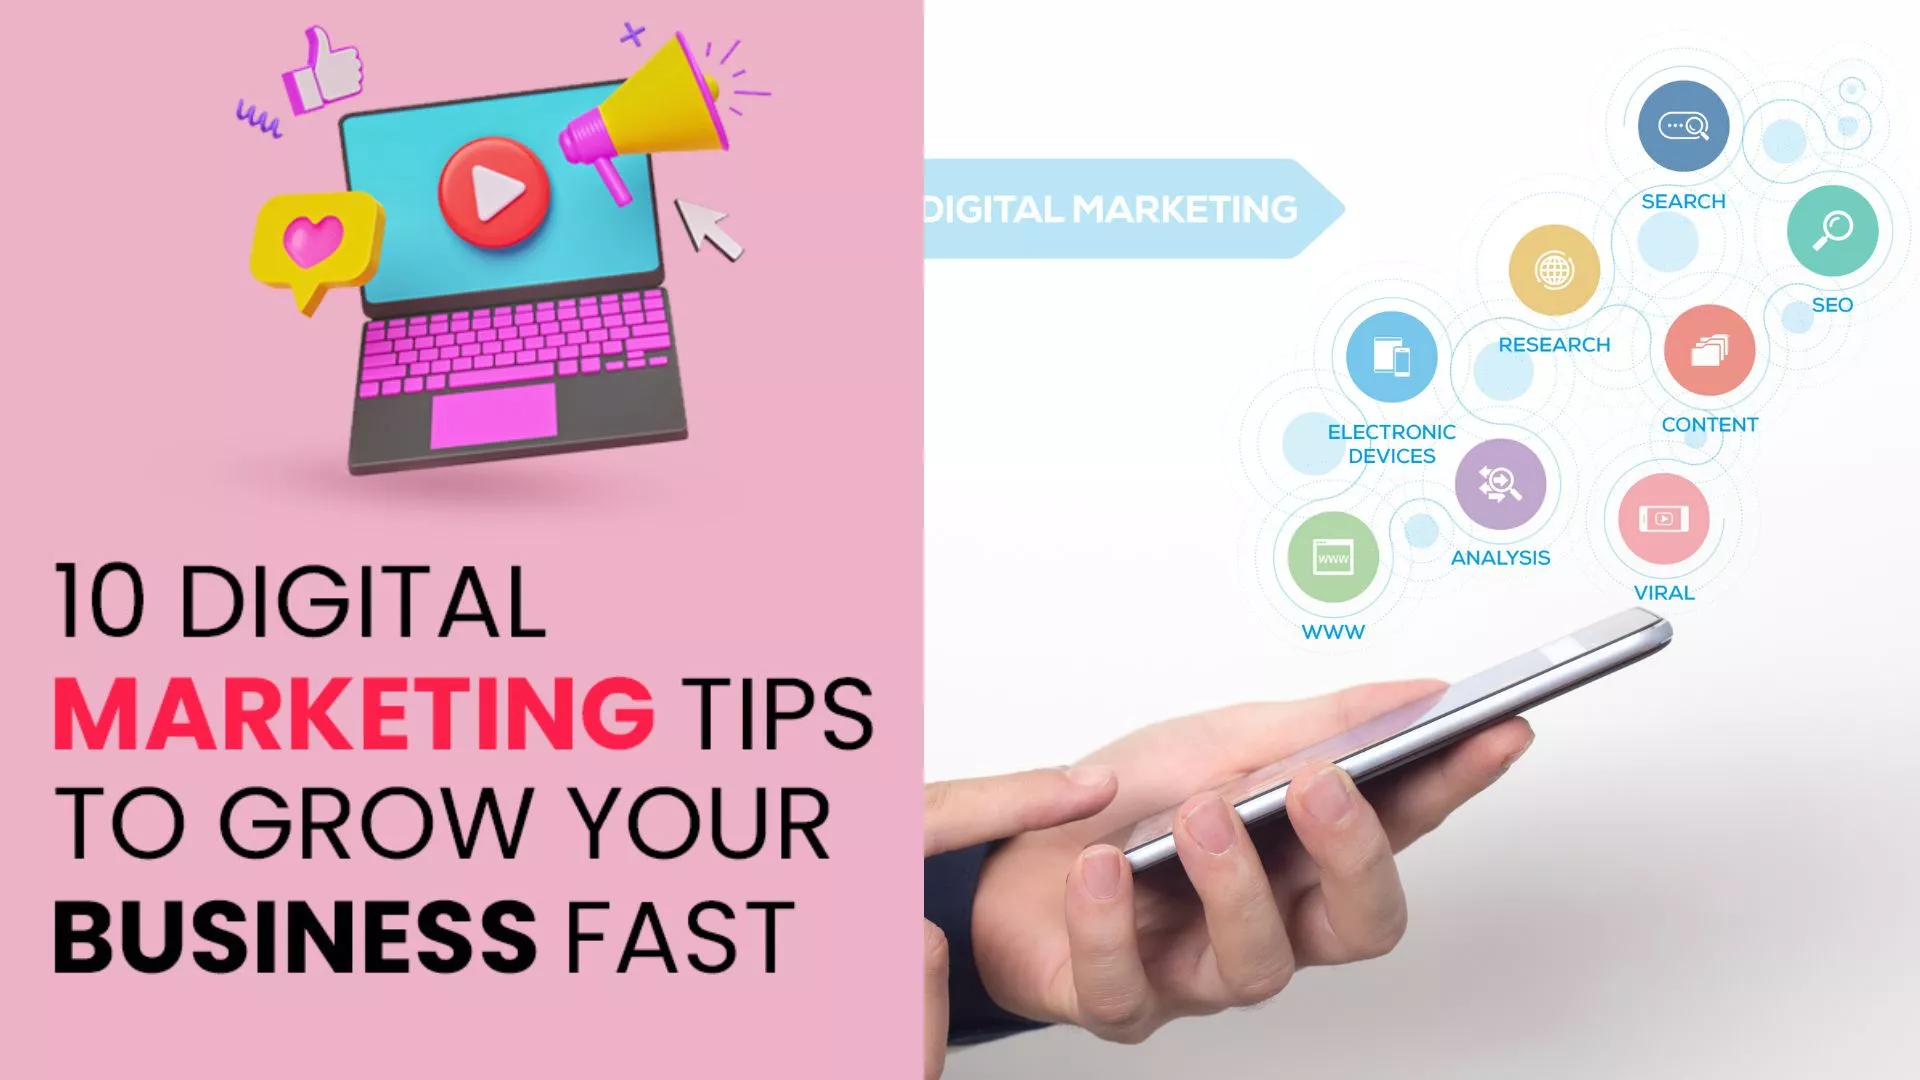 Digital Marketing Tips to Grow Your Business Fast1-